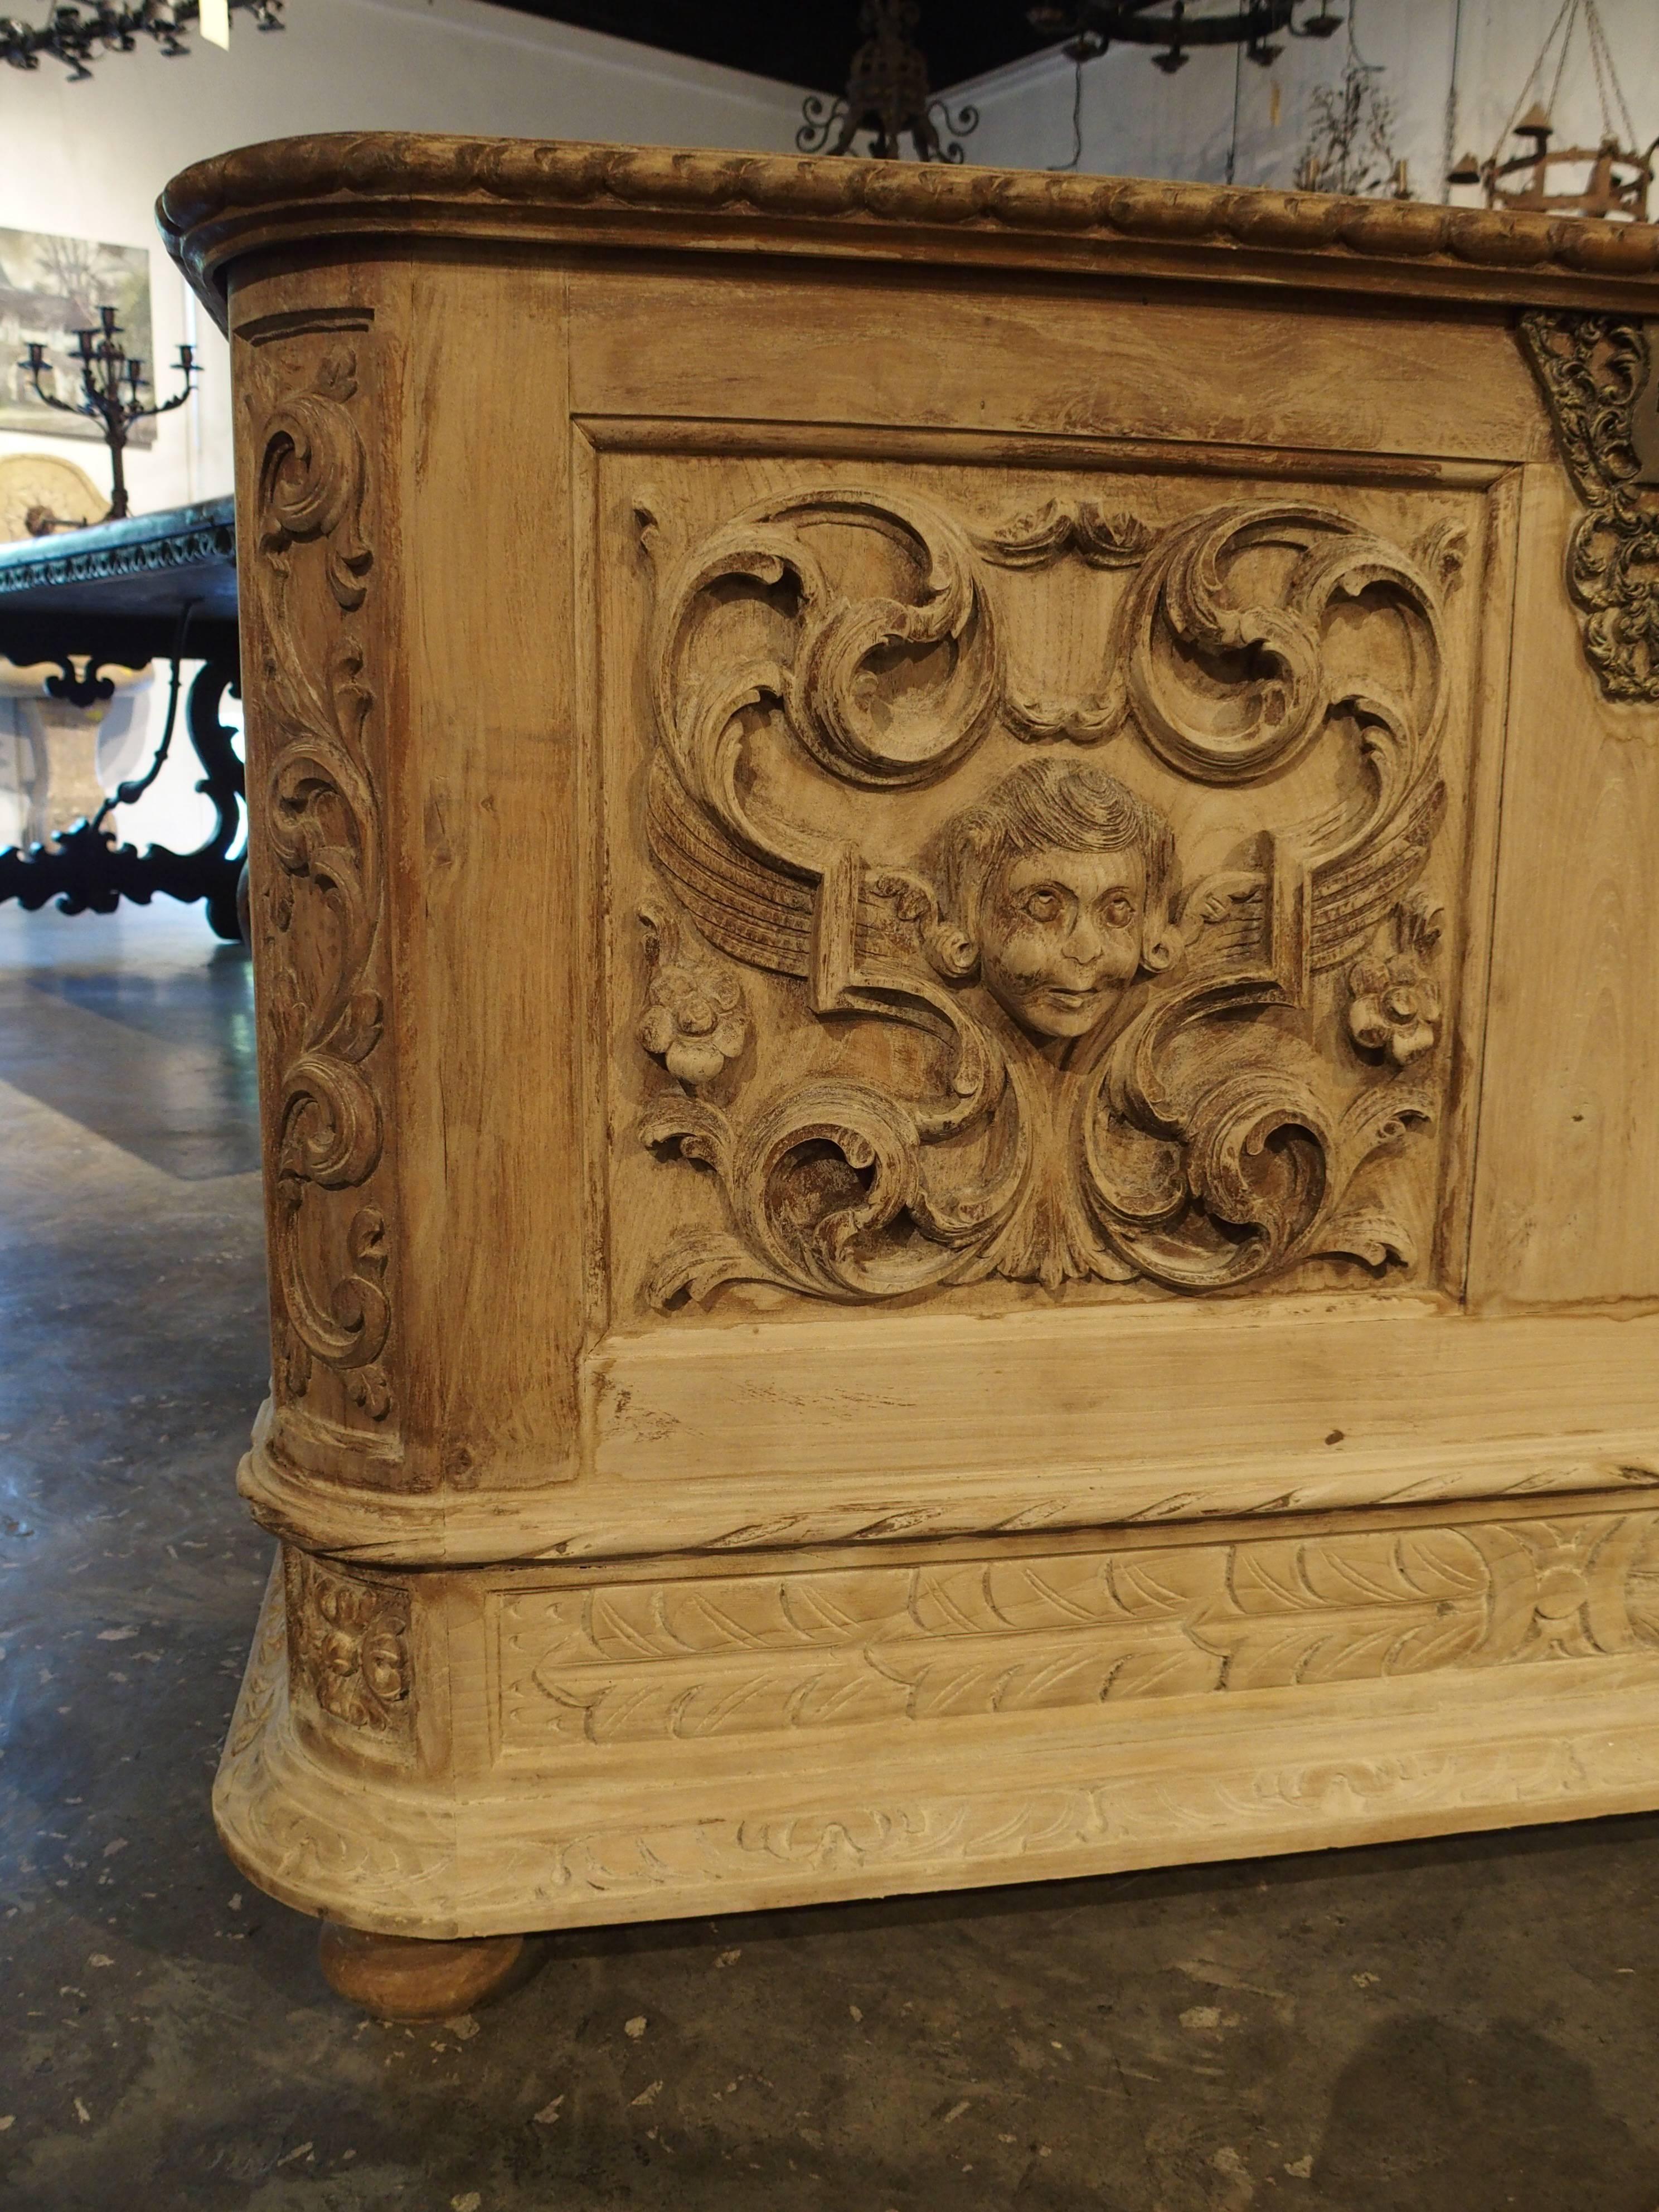 This attractive Italian trunk has highly carved motifs on three sides and has been recently stripped/cleaned.  The front has two panels with scrolling acanthus leaves with florets surrounding a carved face. There is an intricately cast lock (no key)